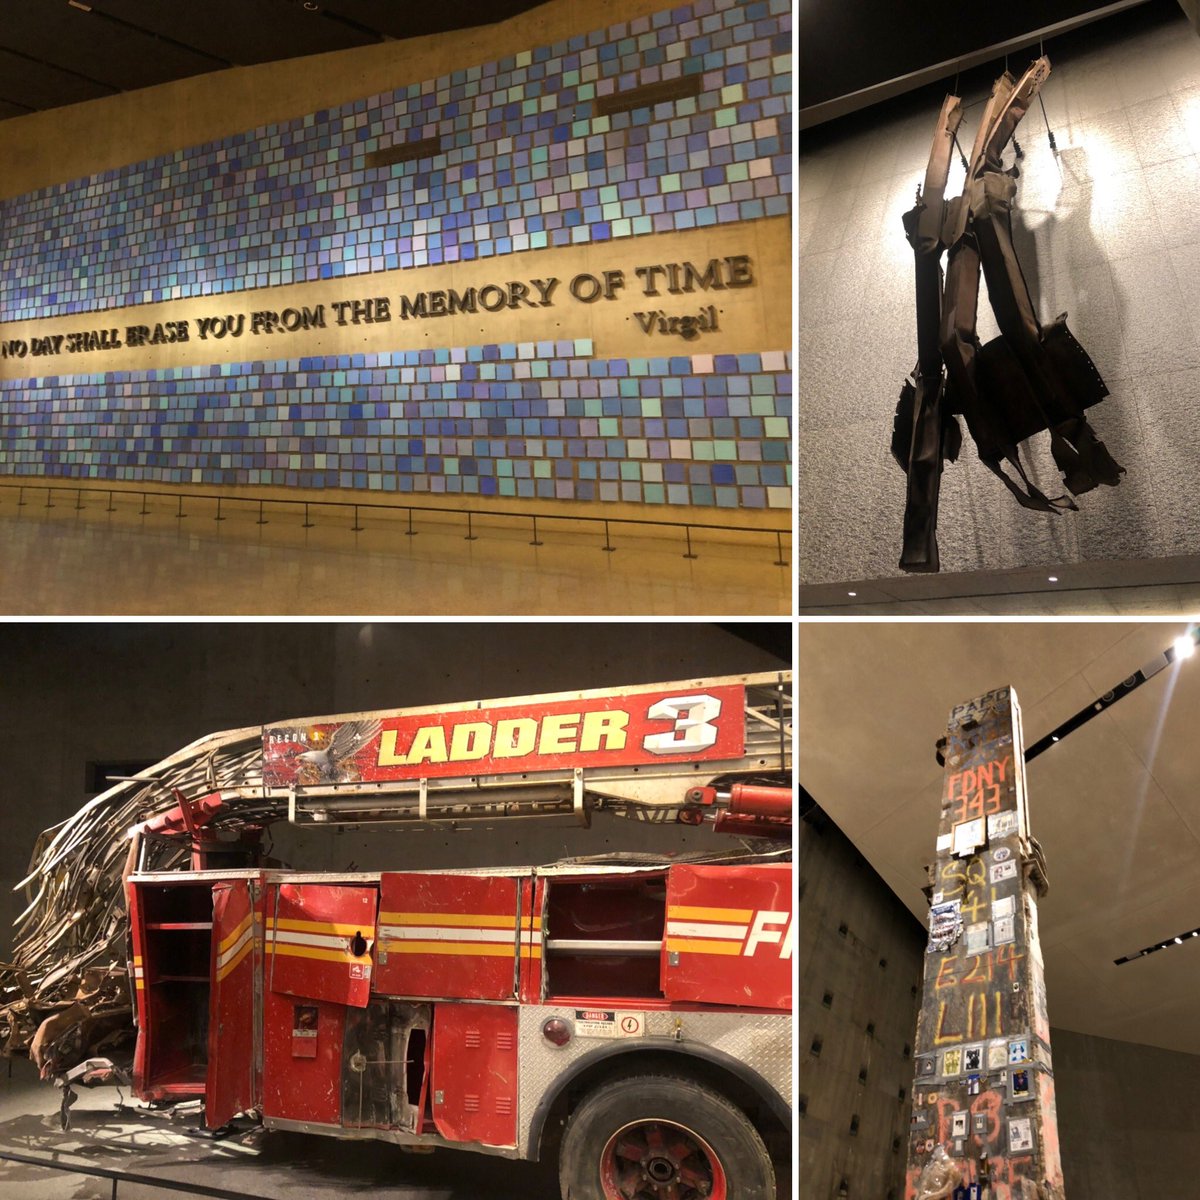 Words can’t describe the experience of visiting the @Sept11Memorial! So well done...educational, moving, respectful! The volunteers are knowledgeable and helpful! Spent almost 4 hours touring and I will be back again. #911Museum #NeverForget